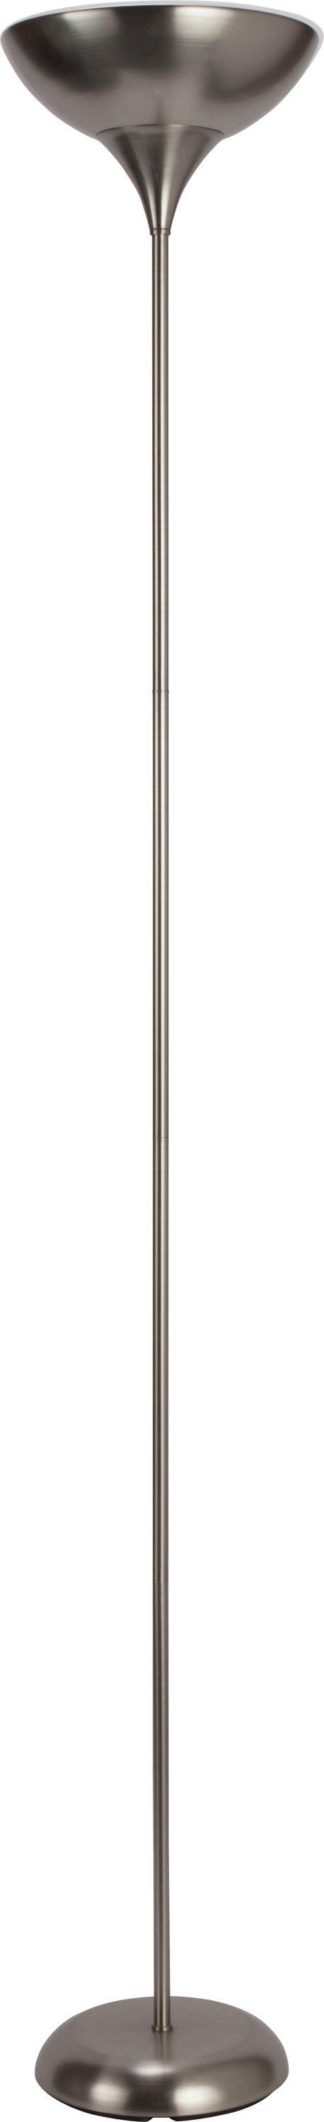 An Image of Argos Home Torchiere Uplighter Floor Lamp - Brushed Chrome